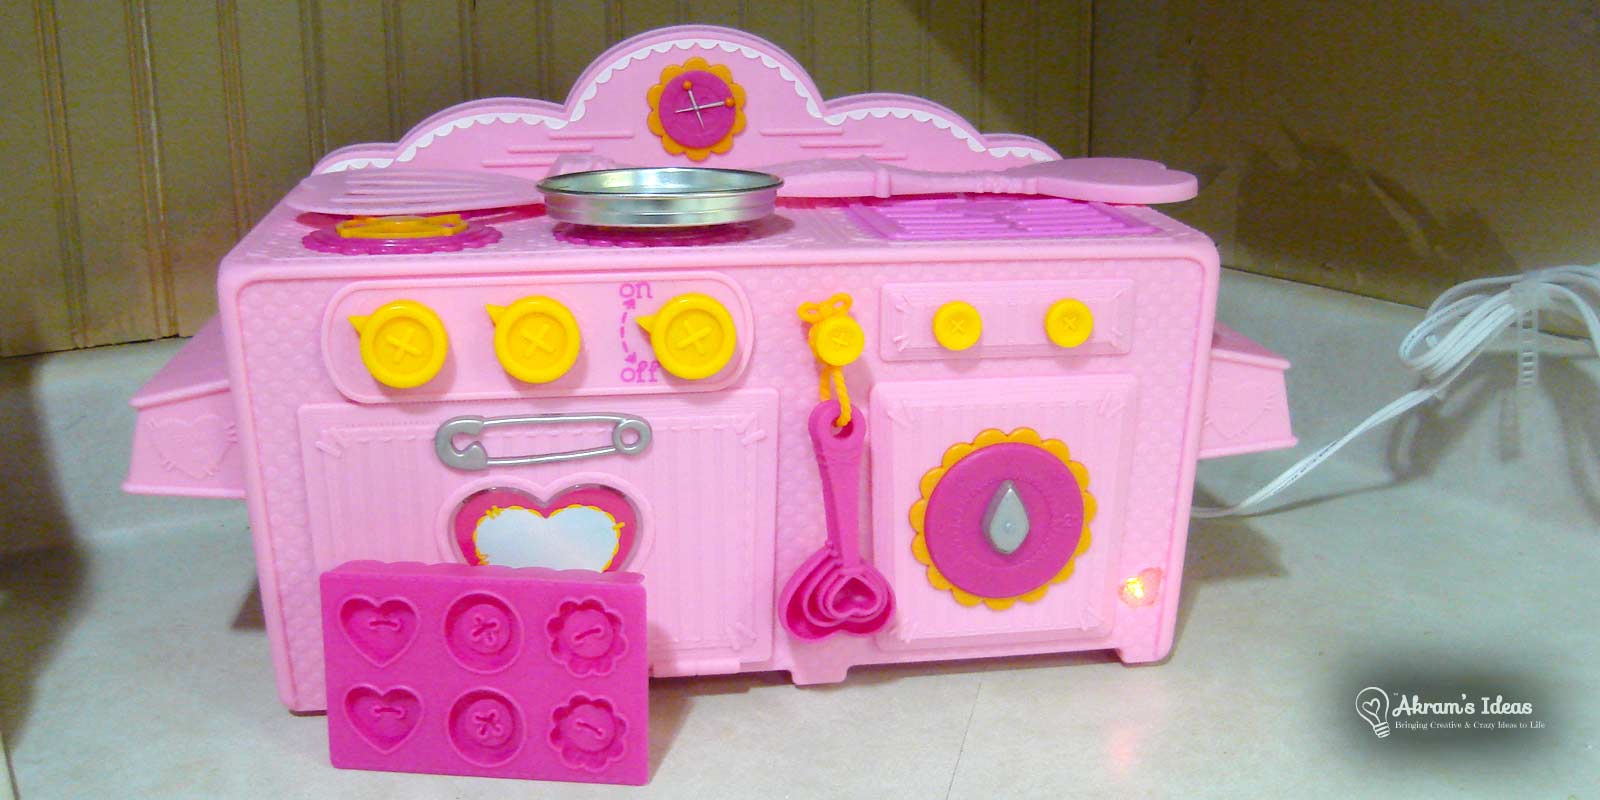 Akram's Ideas: Lalaloopsy Easy Bake Oven Review